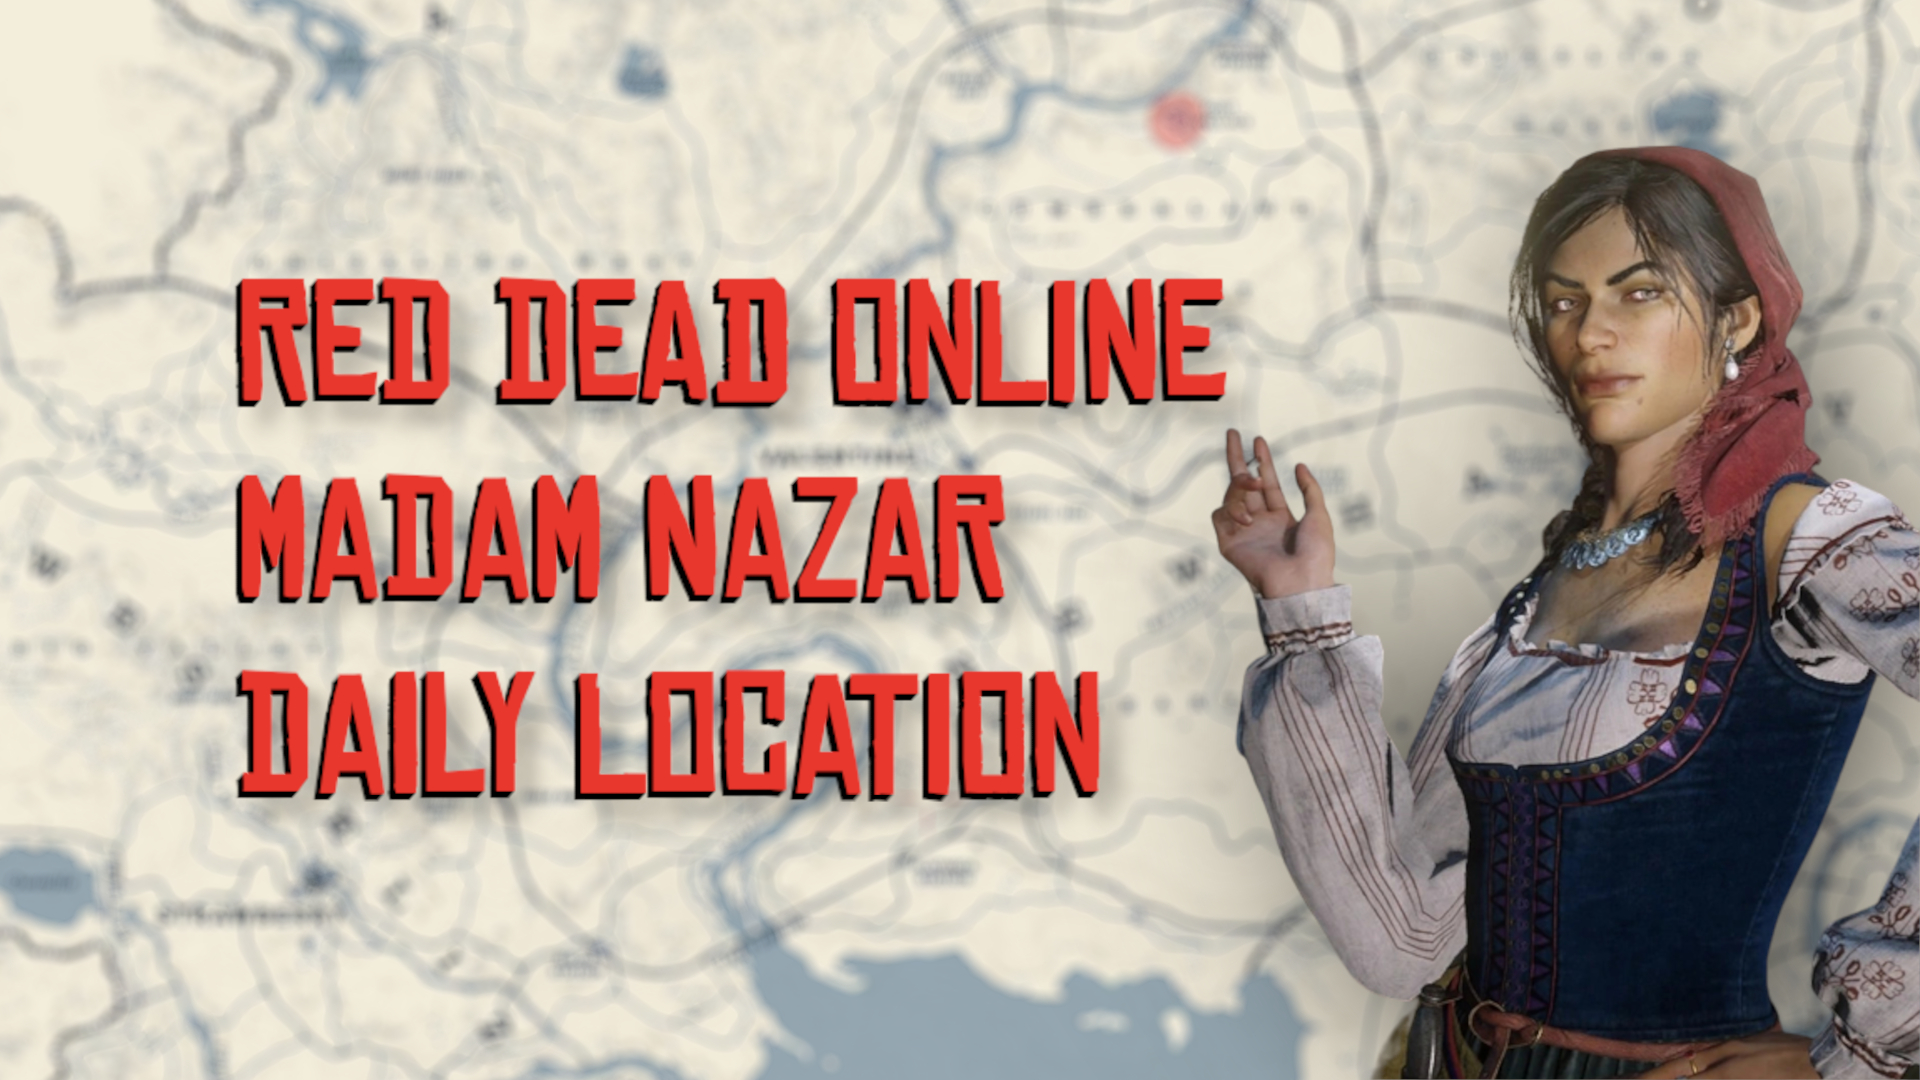 Where is Madam Nazar Red Dead Online on January 21st?